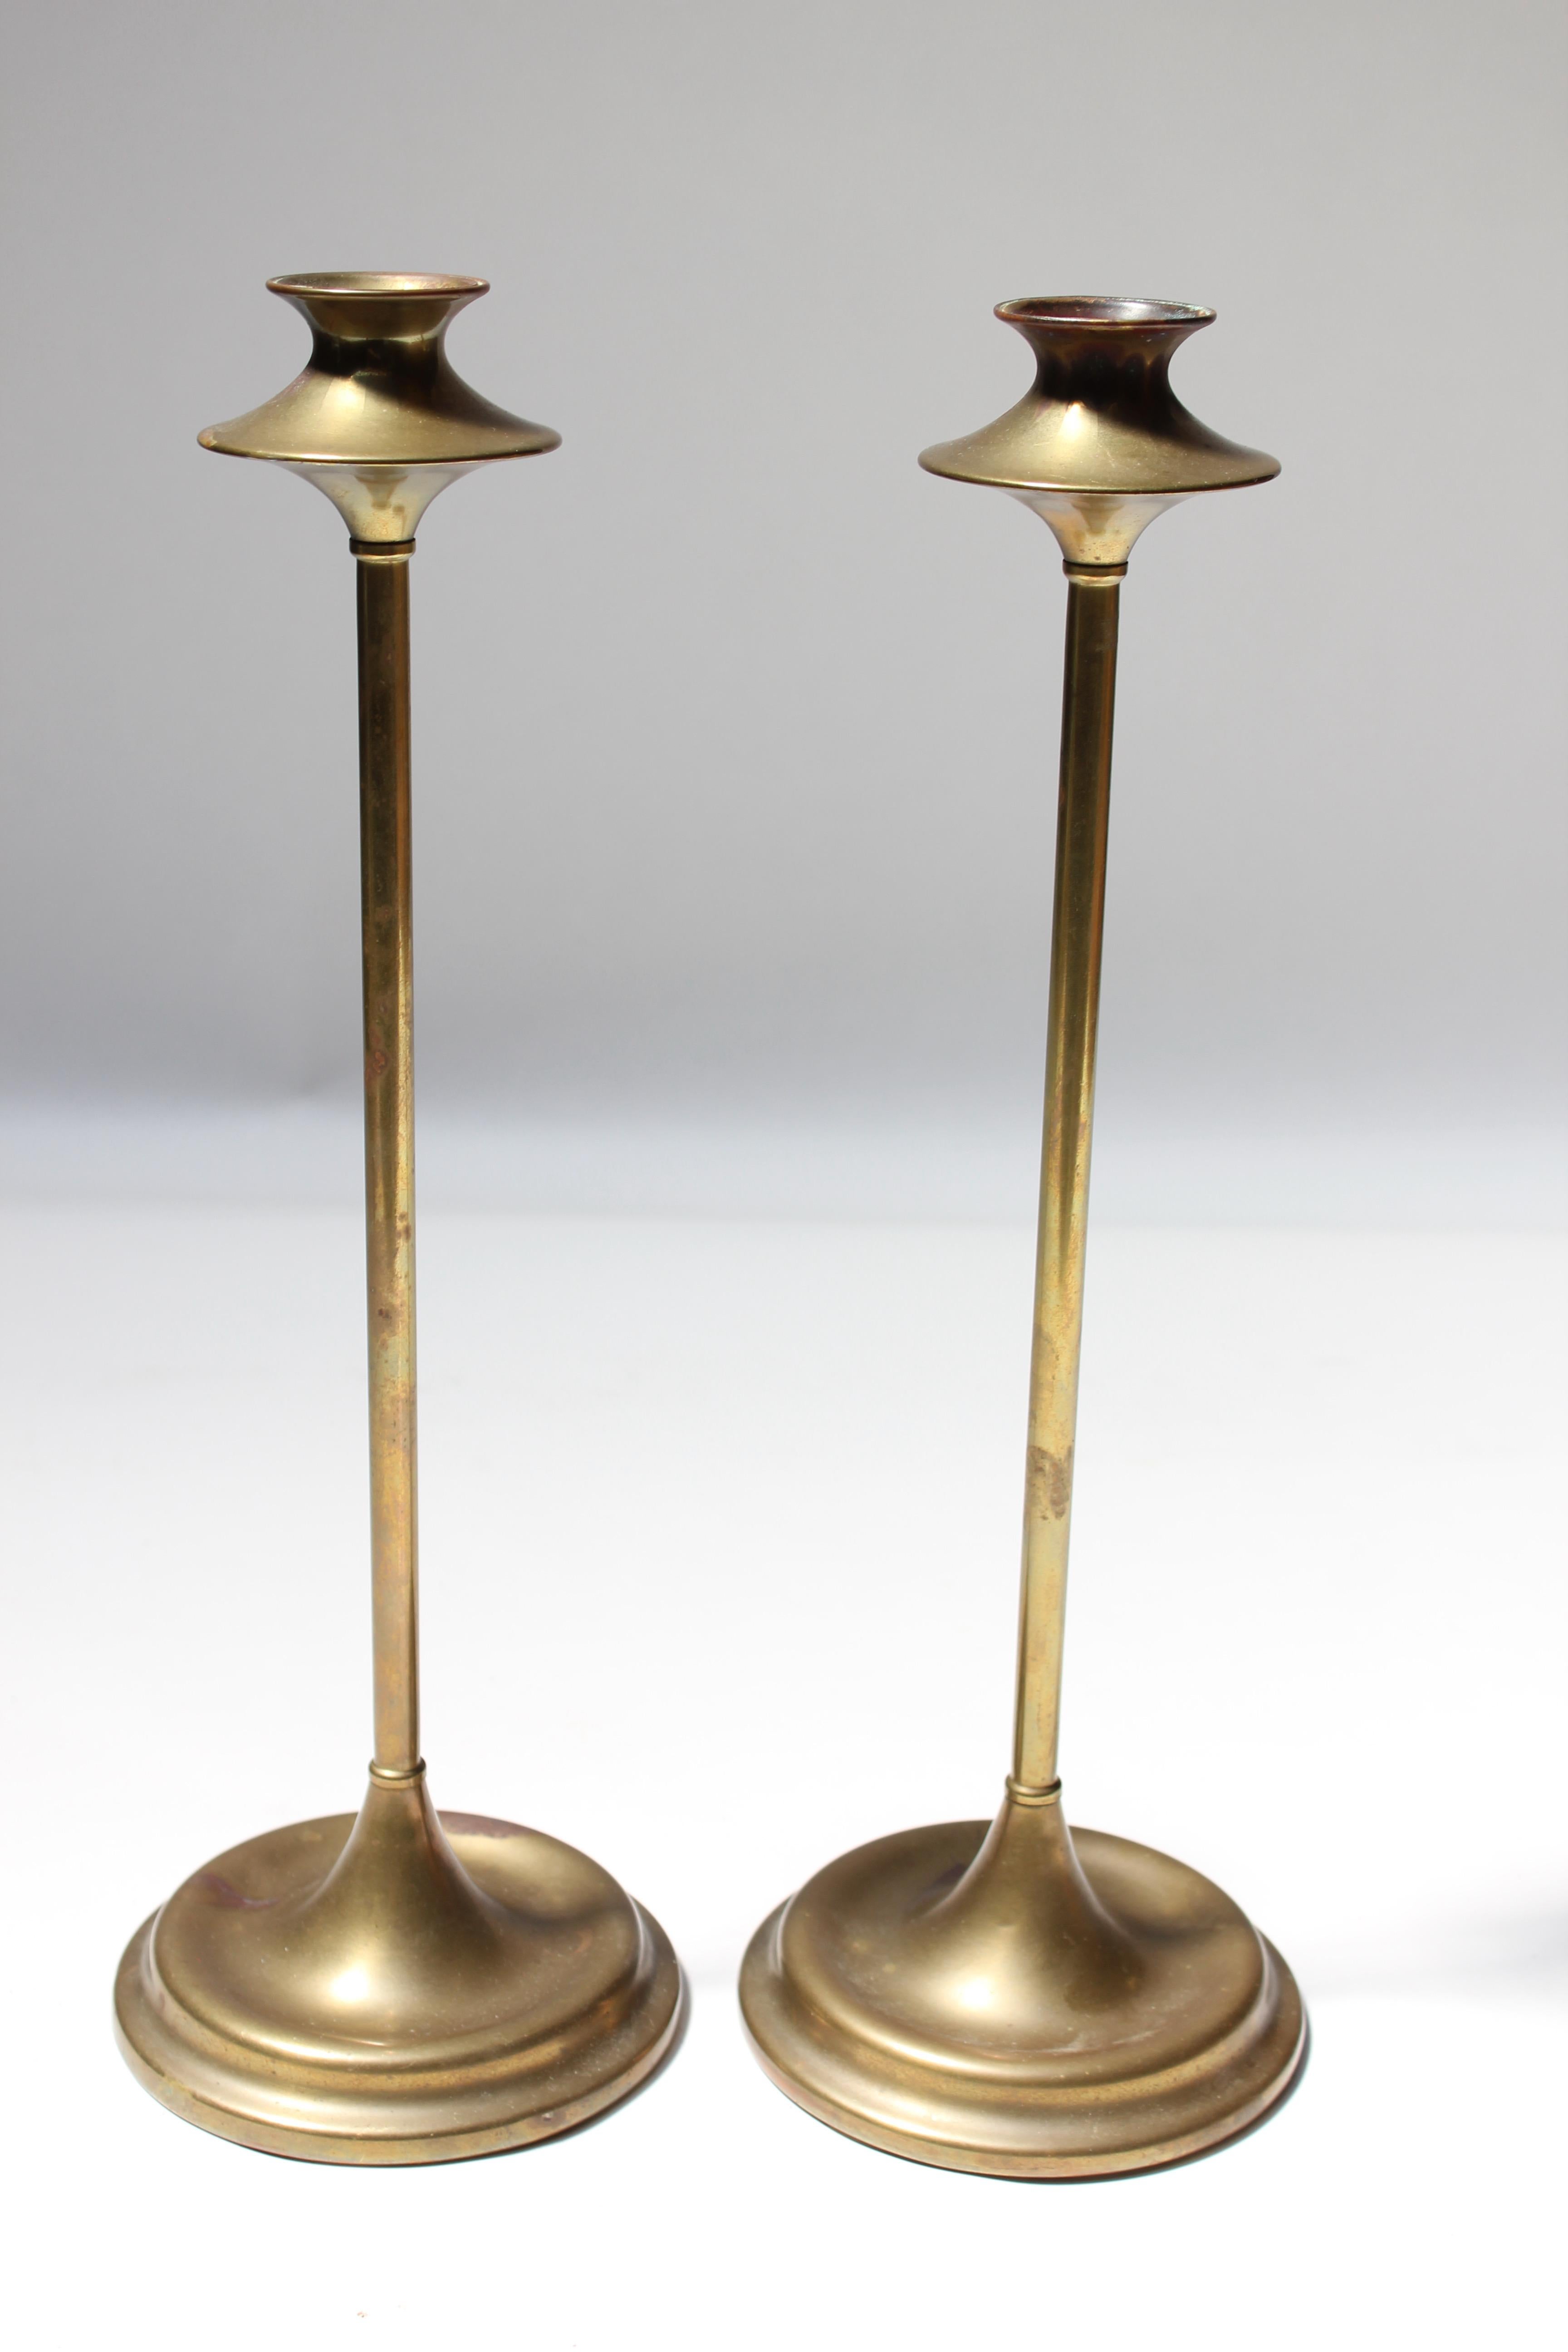 Art & Crafts style brass turned candlesticks, each with bulbous bobeche and cylindrical stem on circular base designed by S Sternau & Co of New York City in the early 20th Century (ca. 1920s).
Original, unpolished condition with rich patina /